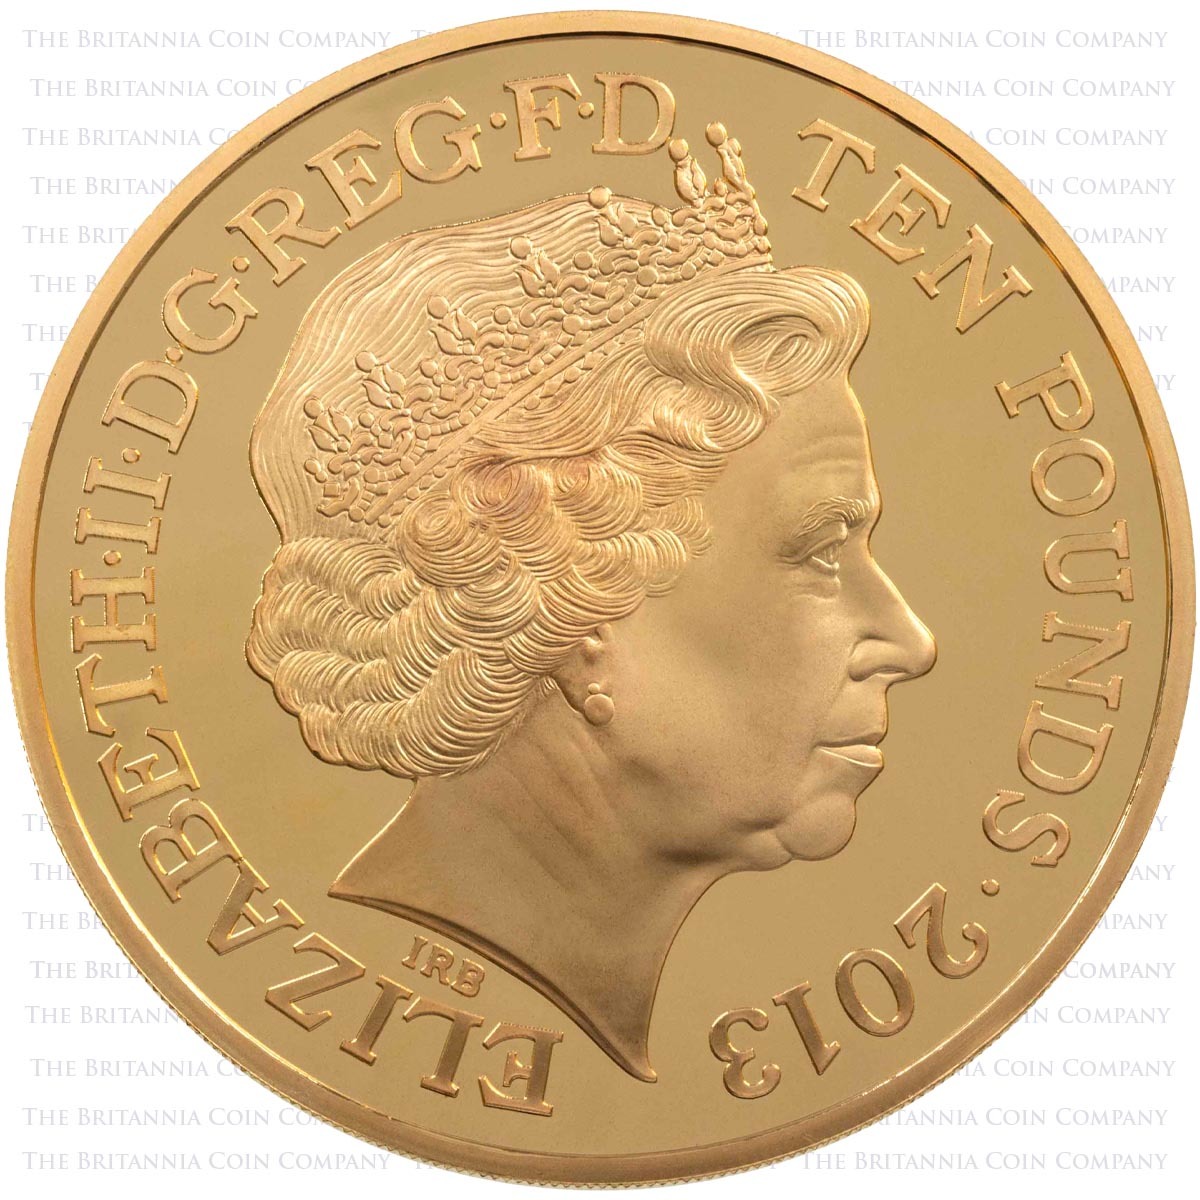 Uk13CO5G 2013 Queen's Coronation Anniversary Five Ounce Gold Proof Coin Certificate One Obverse